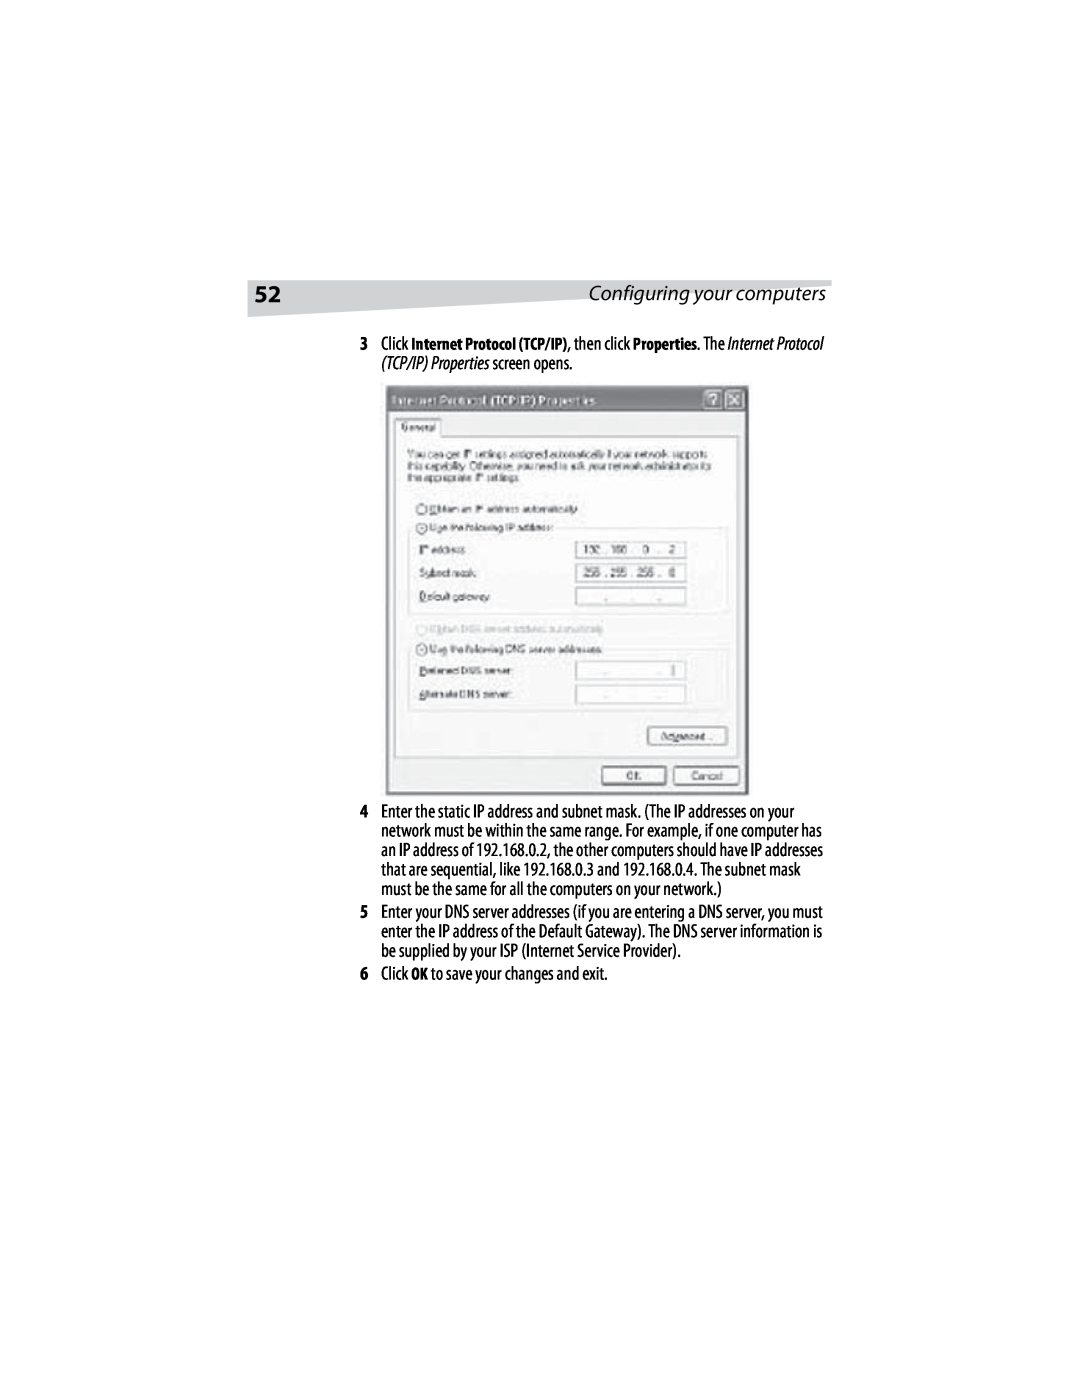 Dynex DX-E401 manual Click OK to save your changes and exit, Configuring your computers 